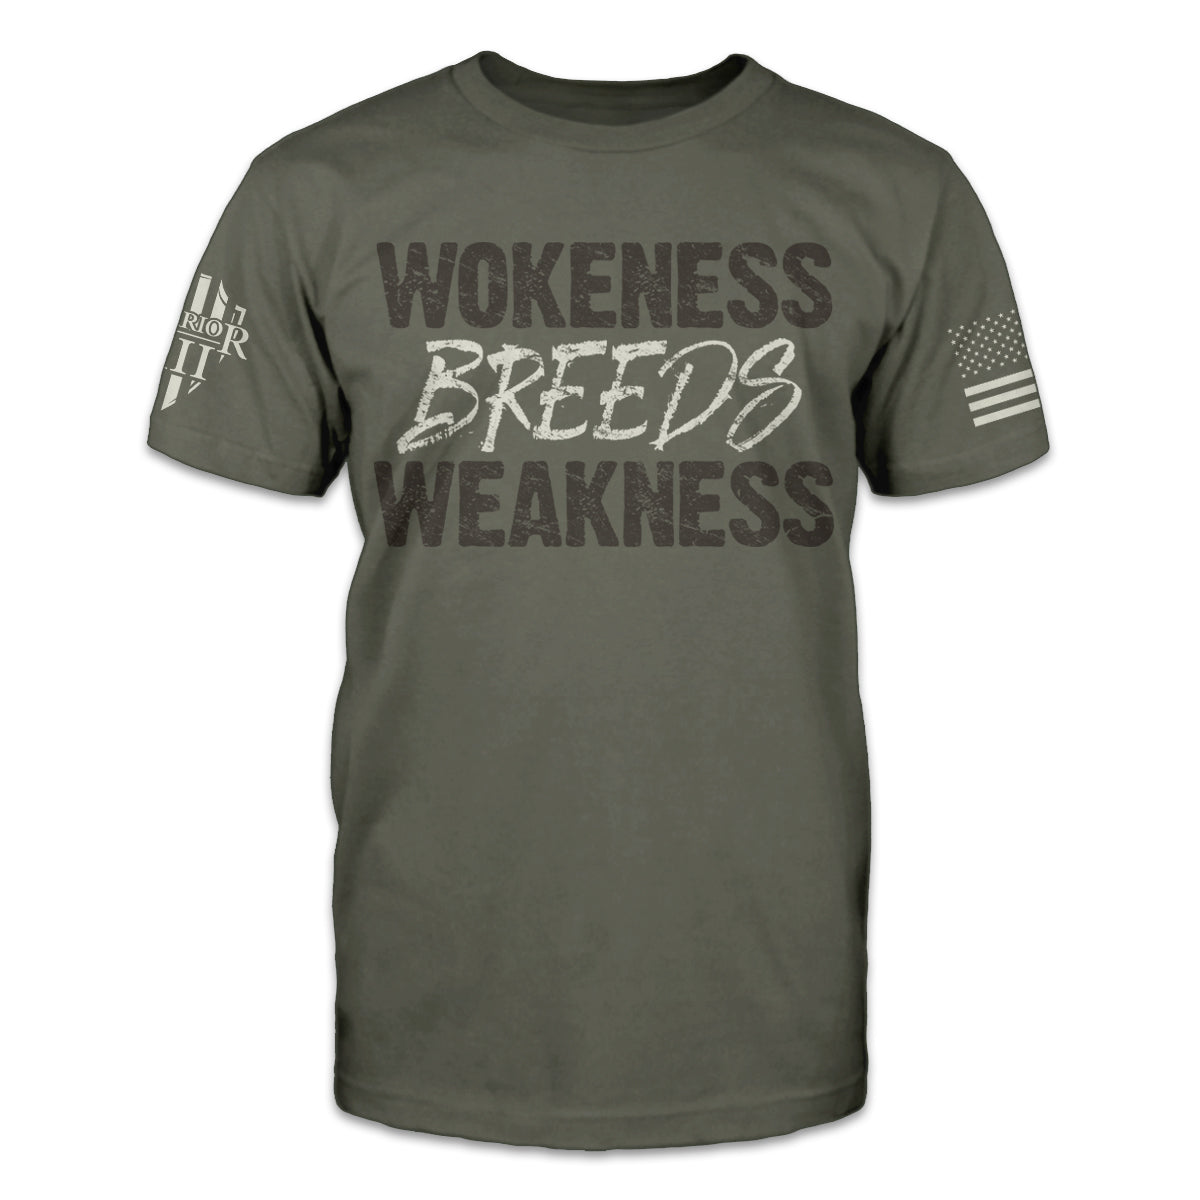 A military green t-shirt with the words "Wokeness Breeds Weakness" printed on the front of the shirt.